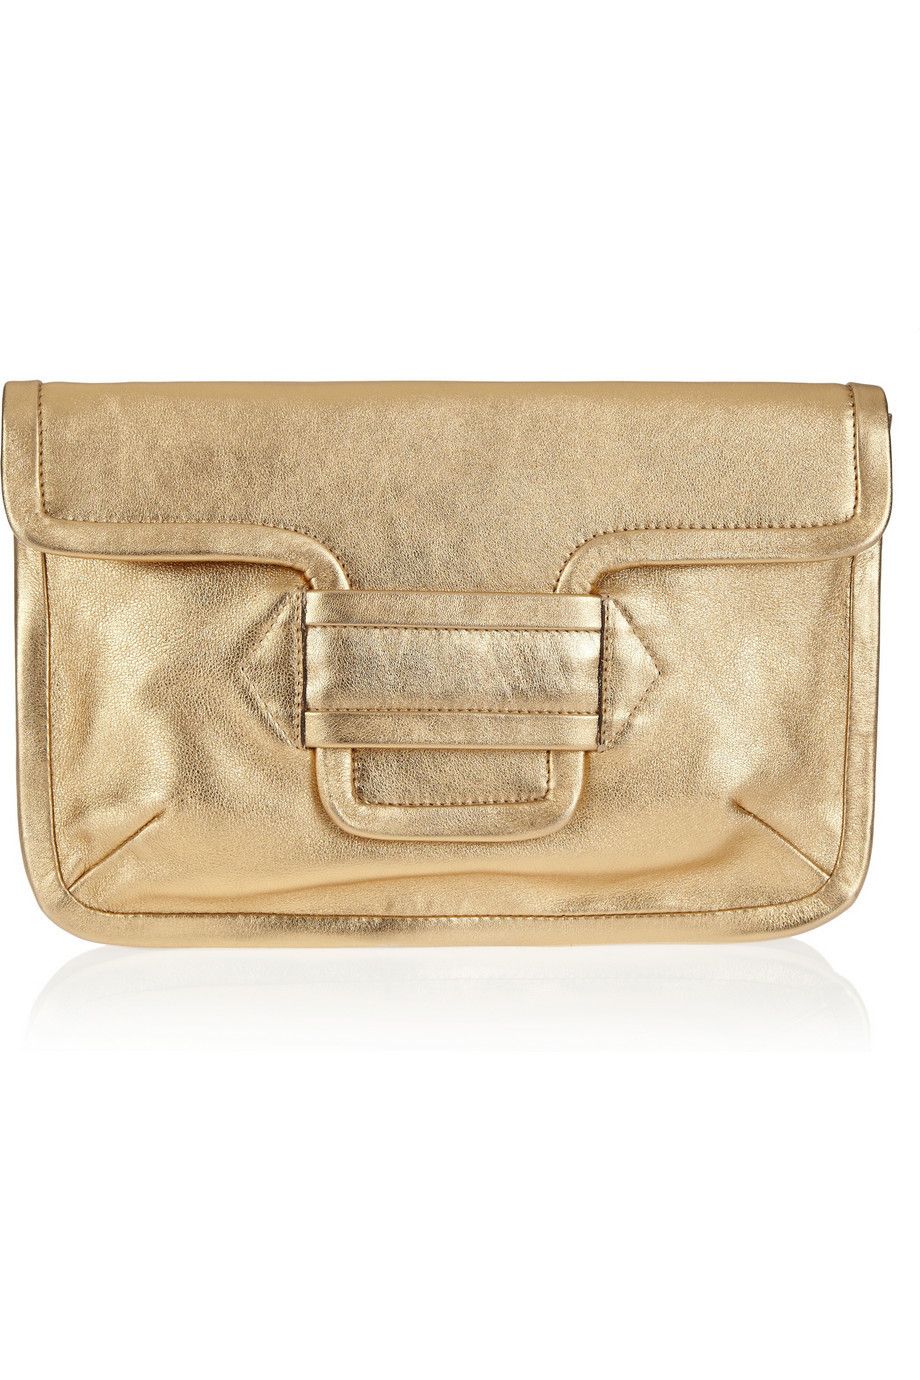 Brown, Textile, Khaki, Tan, Leather, Rectangle, Beige, Material property, Bag, Wallet, 